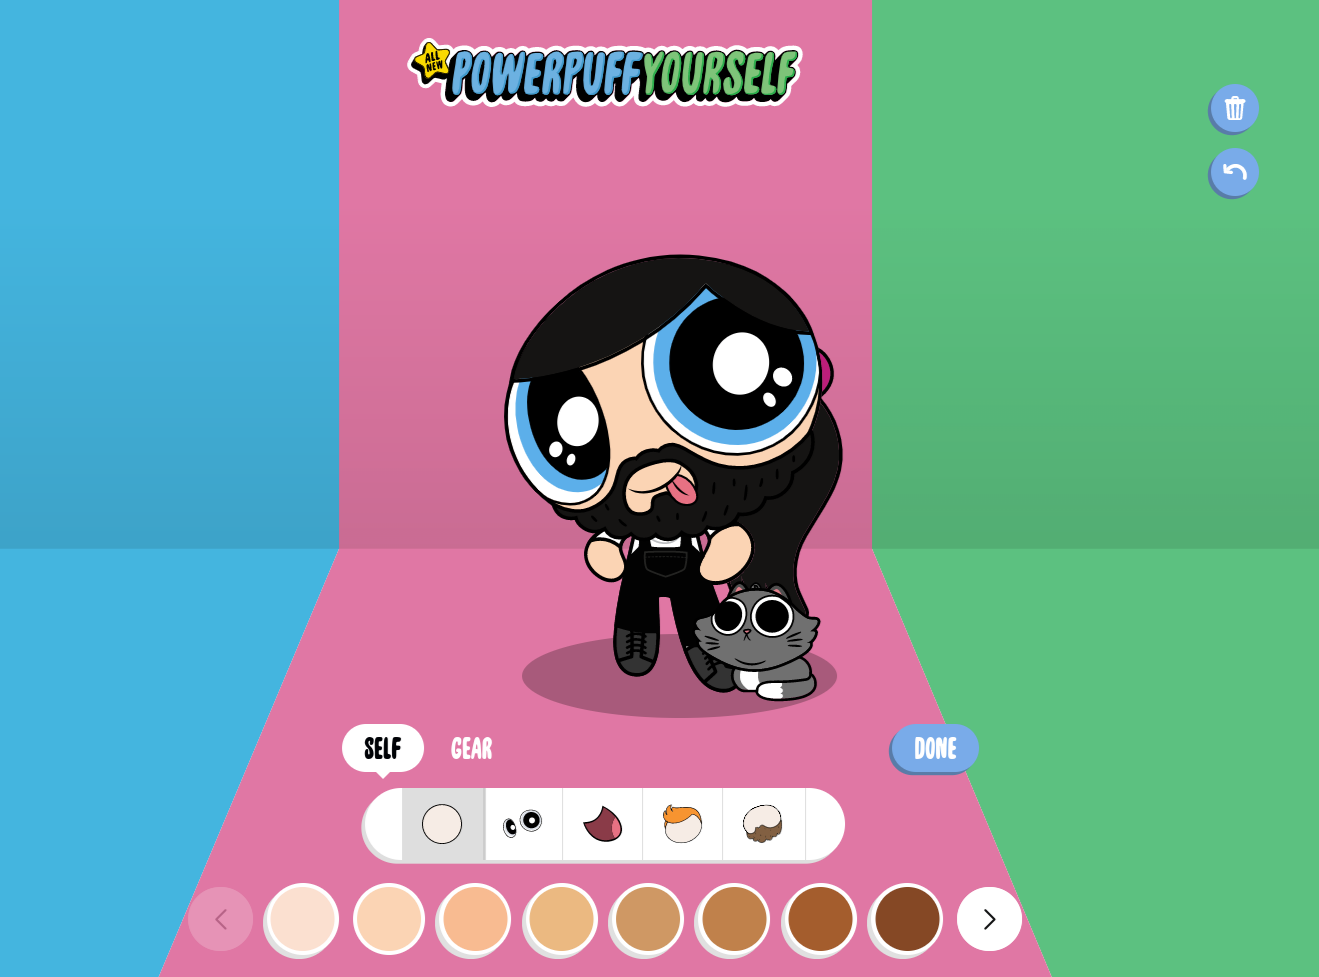 Screenshot from powerpuffyourself.com, featuring a cartoon character that was made by appearance options.